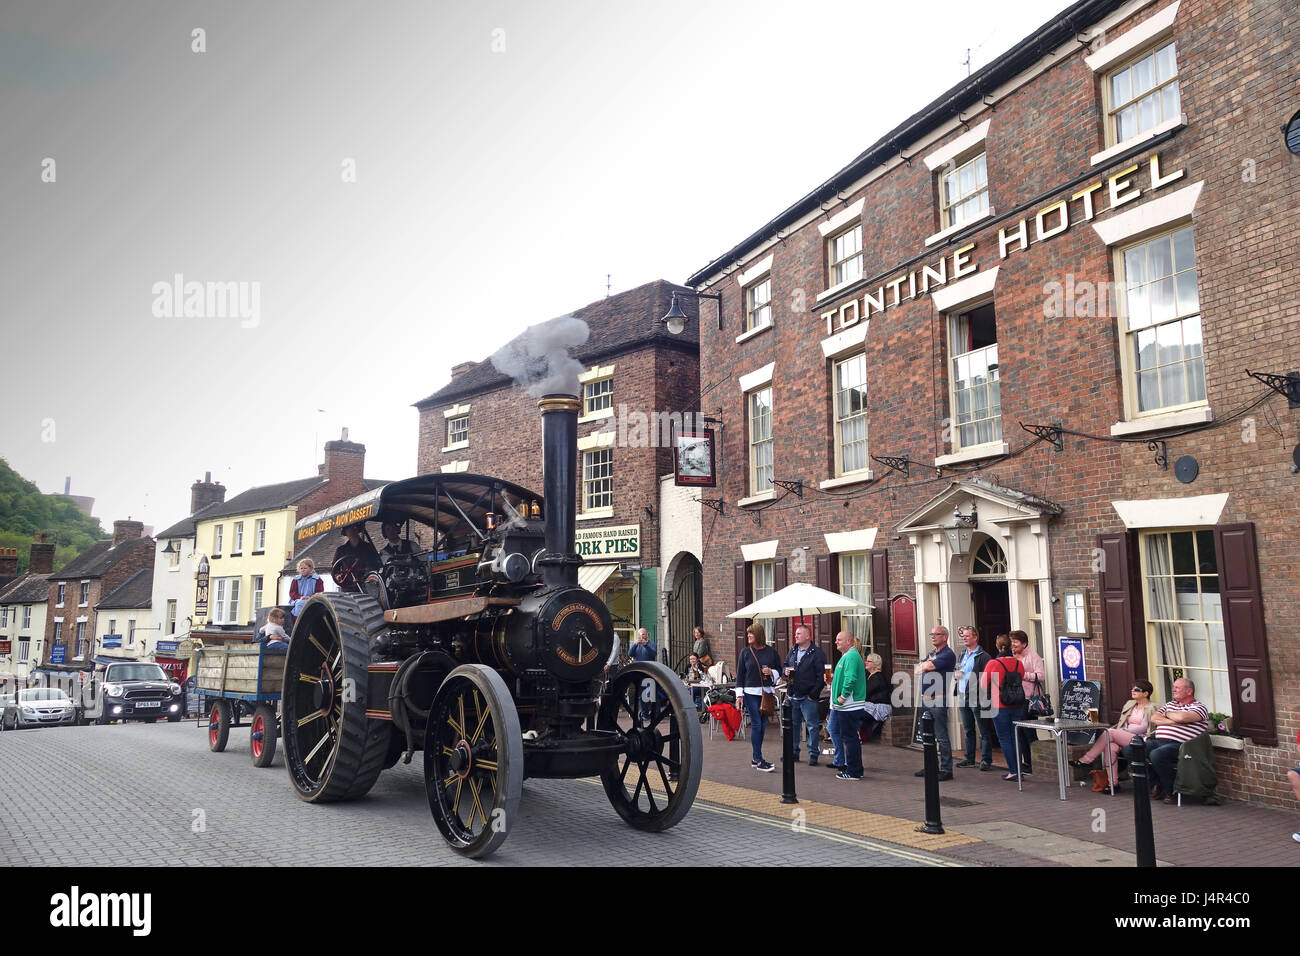 The historic streets of Ironbridge were turned back in time when 30 vintage steam engines rolled through the Gorge as part of the Ironbnridge Gorge Museums 50th aniversary celebrations. Credit: David Bagnall/Alamy Live News Stock Photo